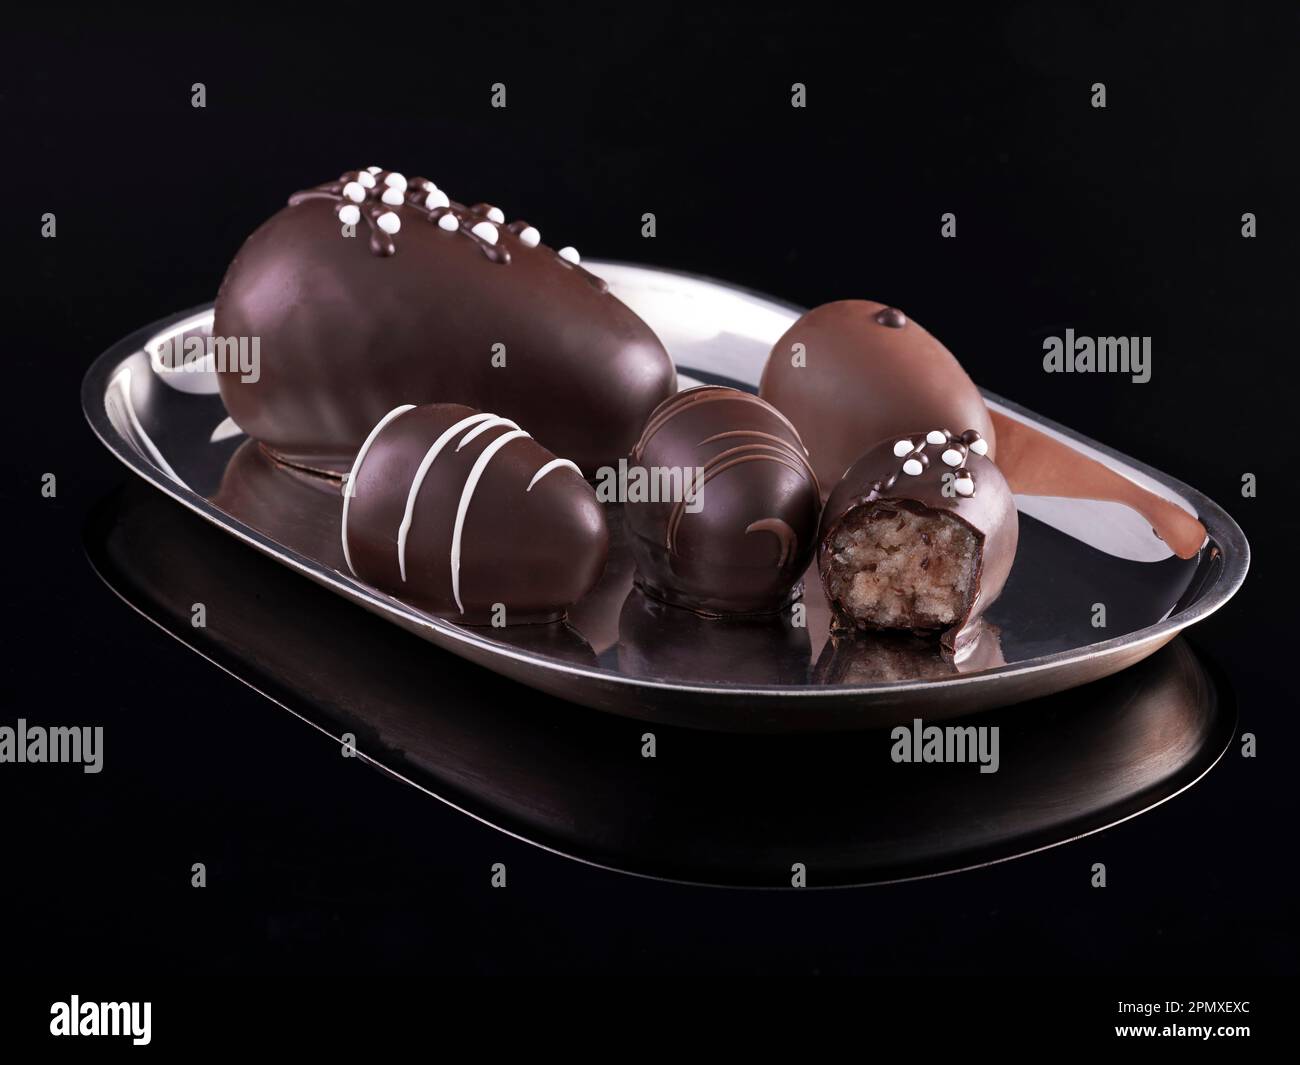 Silver serving platter with noble decorated marzipan chocolates on black background with reflections. Stock Photo